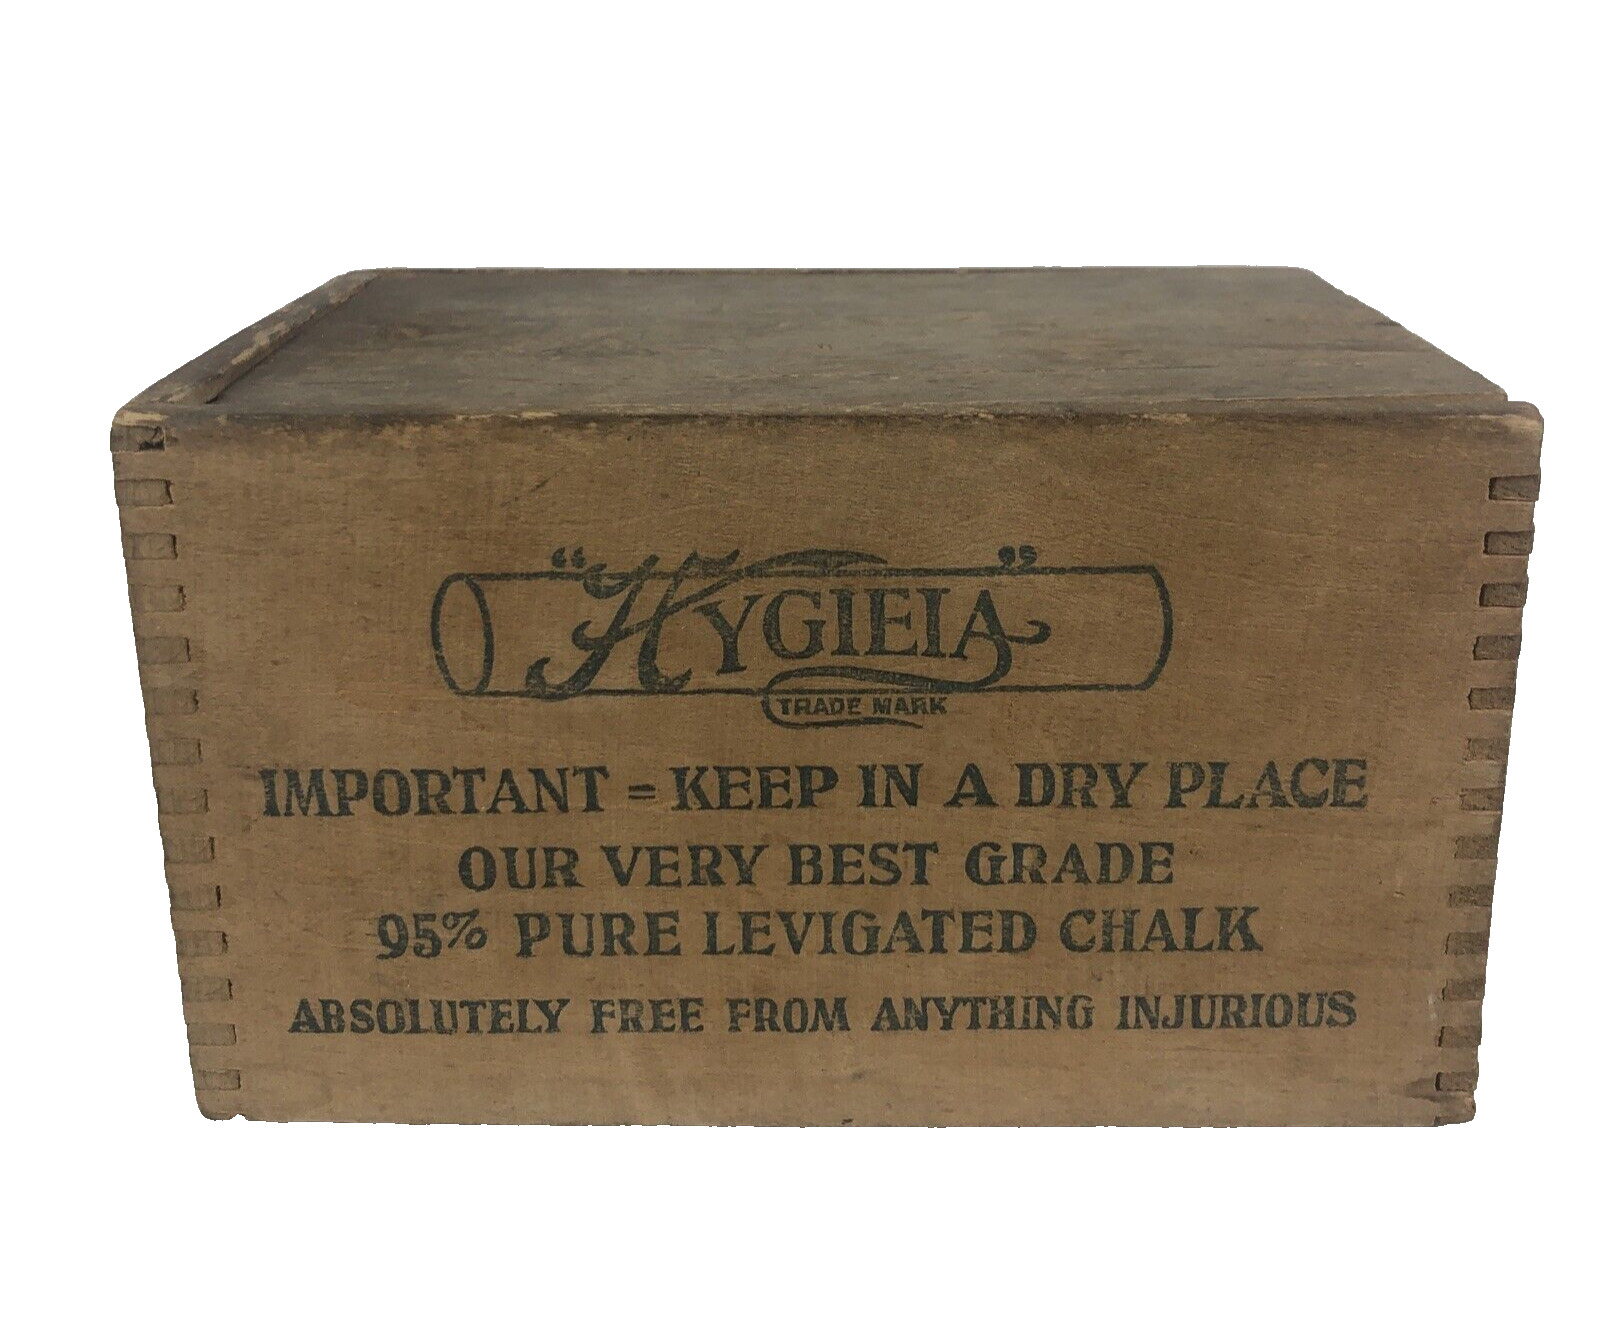 Vintage Old Faithful Hygieia Dovetail Wooden Box Advertising American Crayon Co.